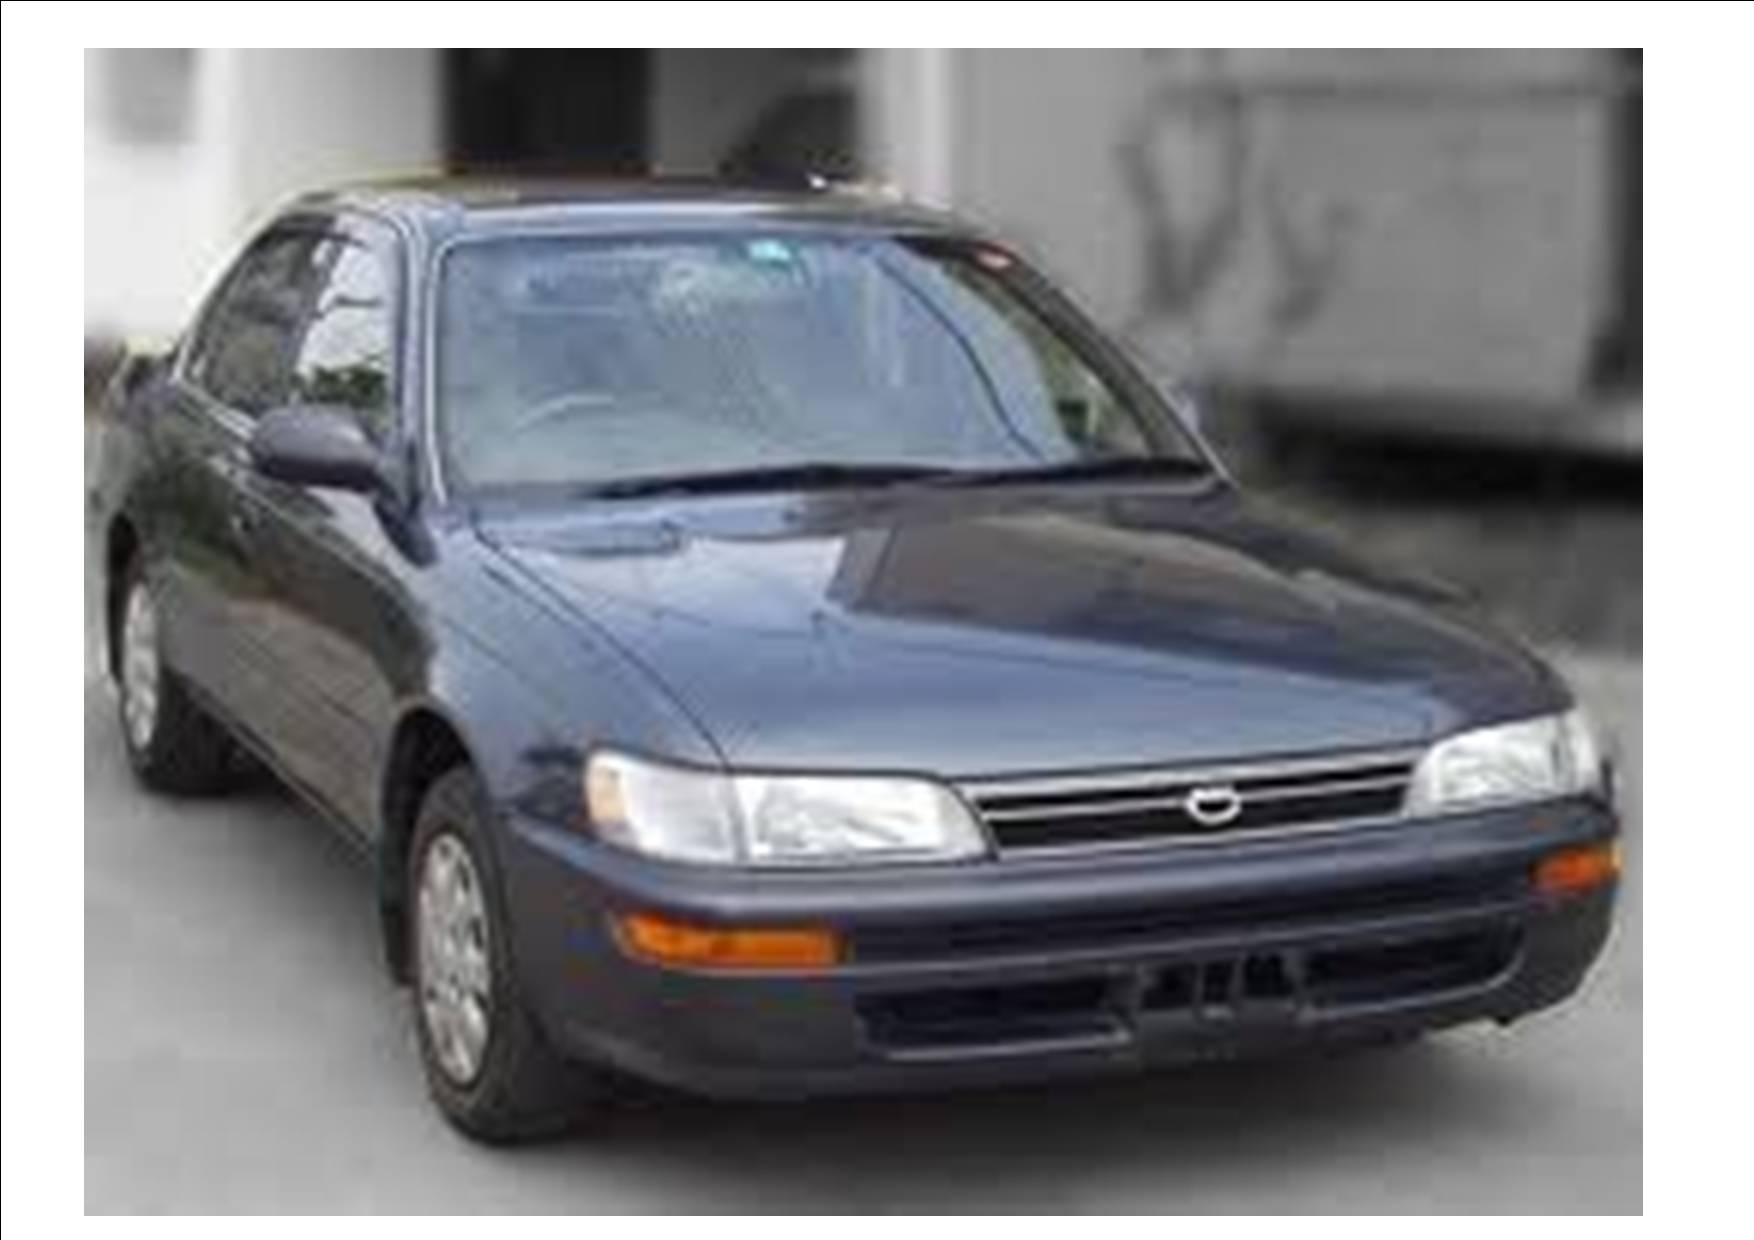 1992+Toyota+Corolla+Parts Parts for TOYOTA COROLLA 1992-1994 AE100 eng ...